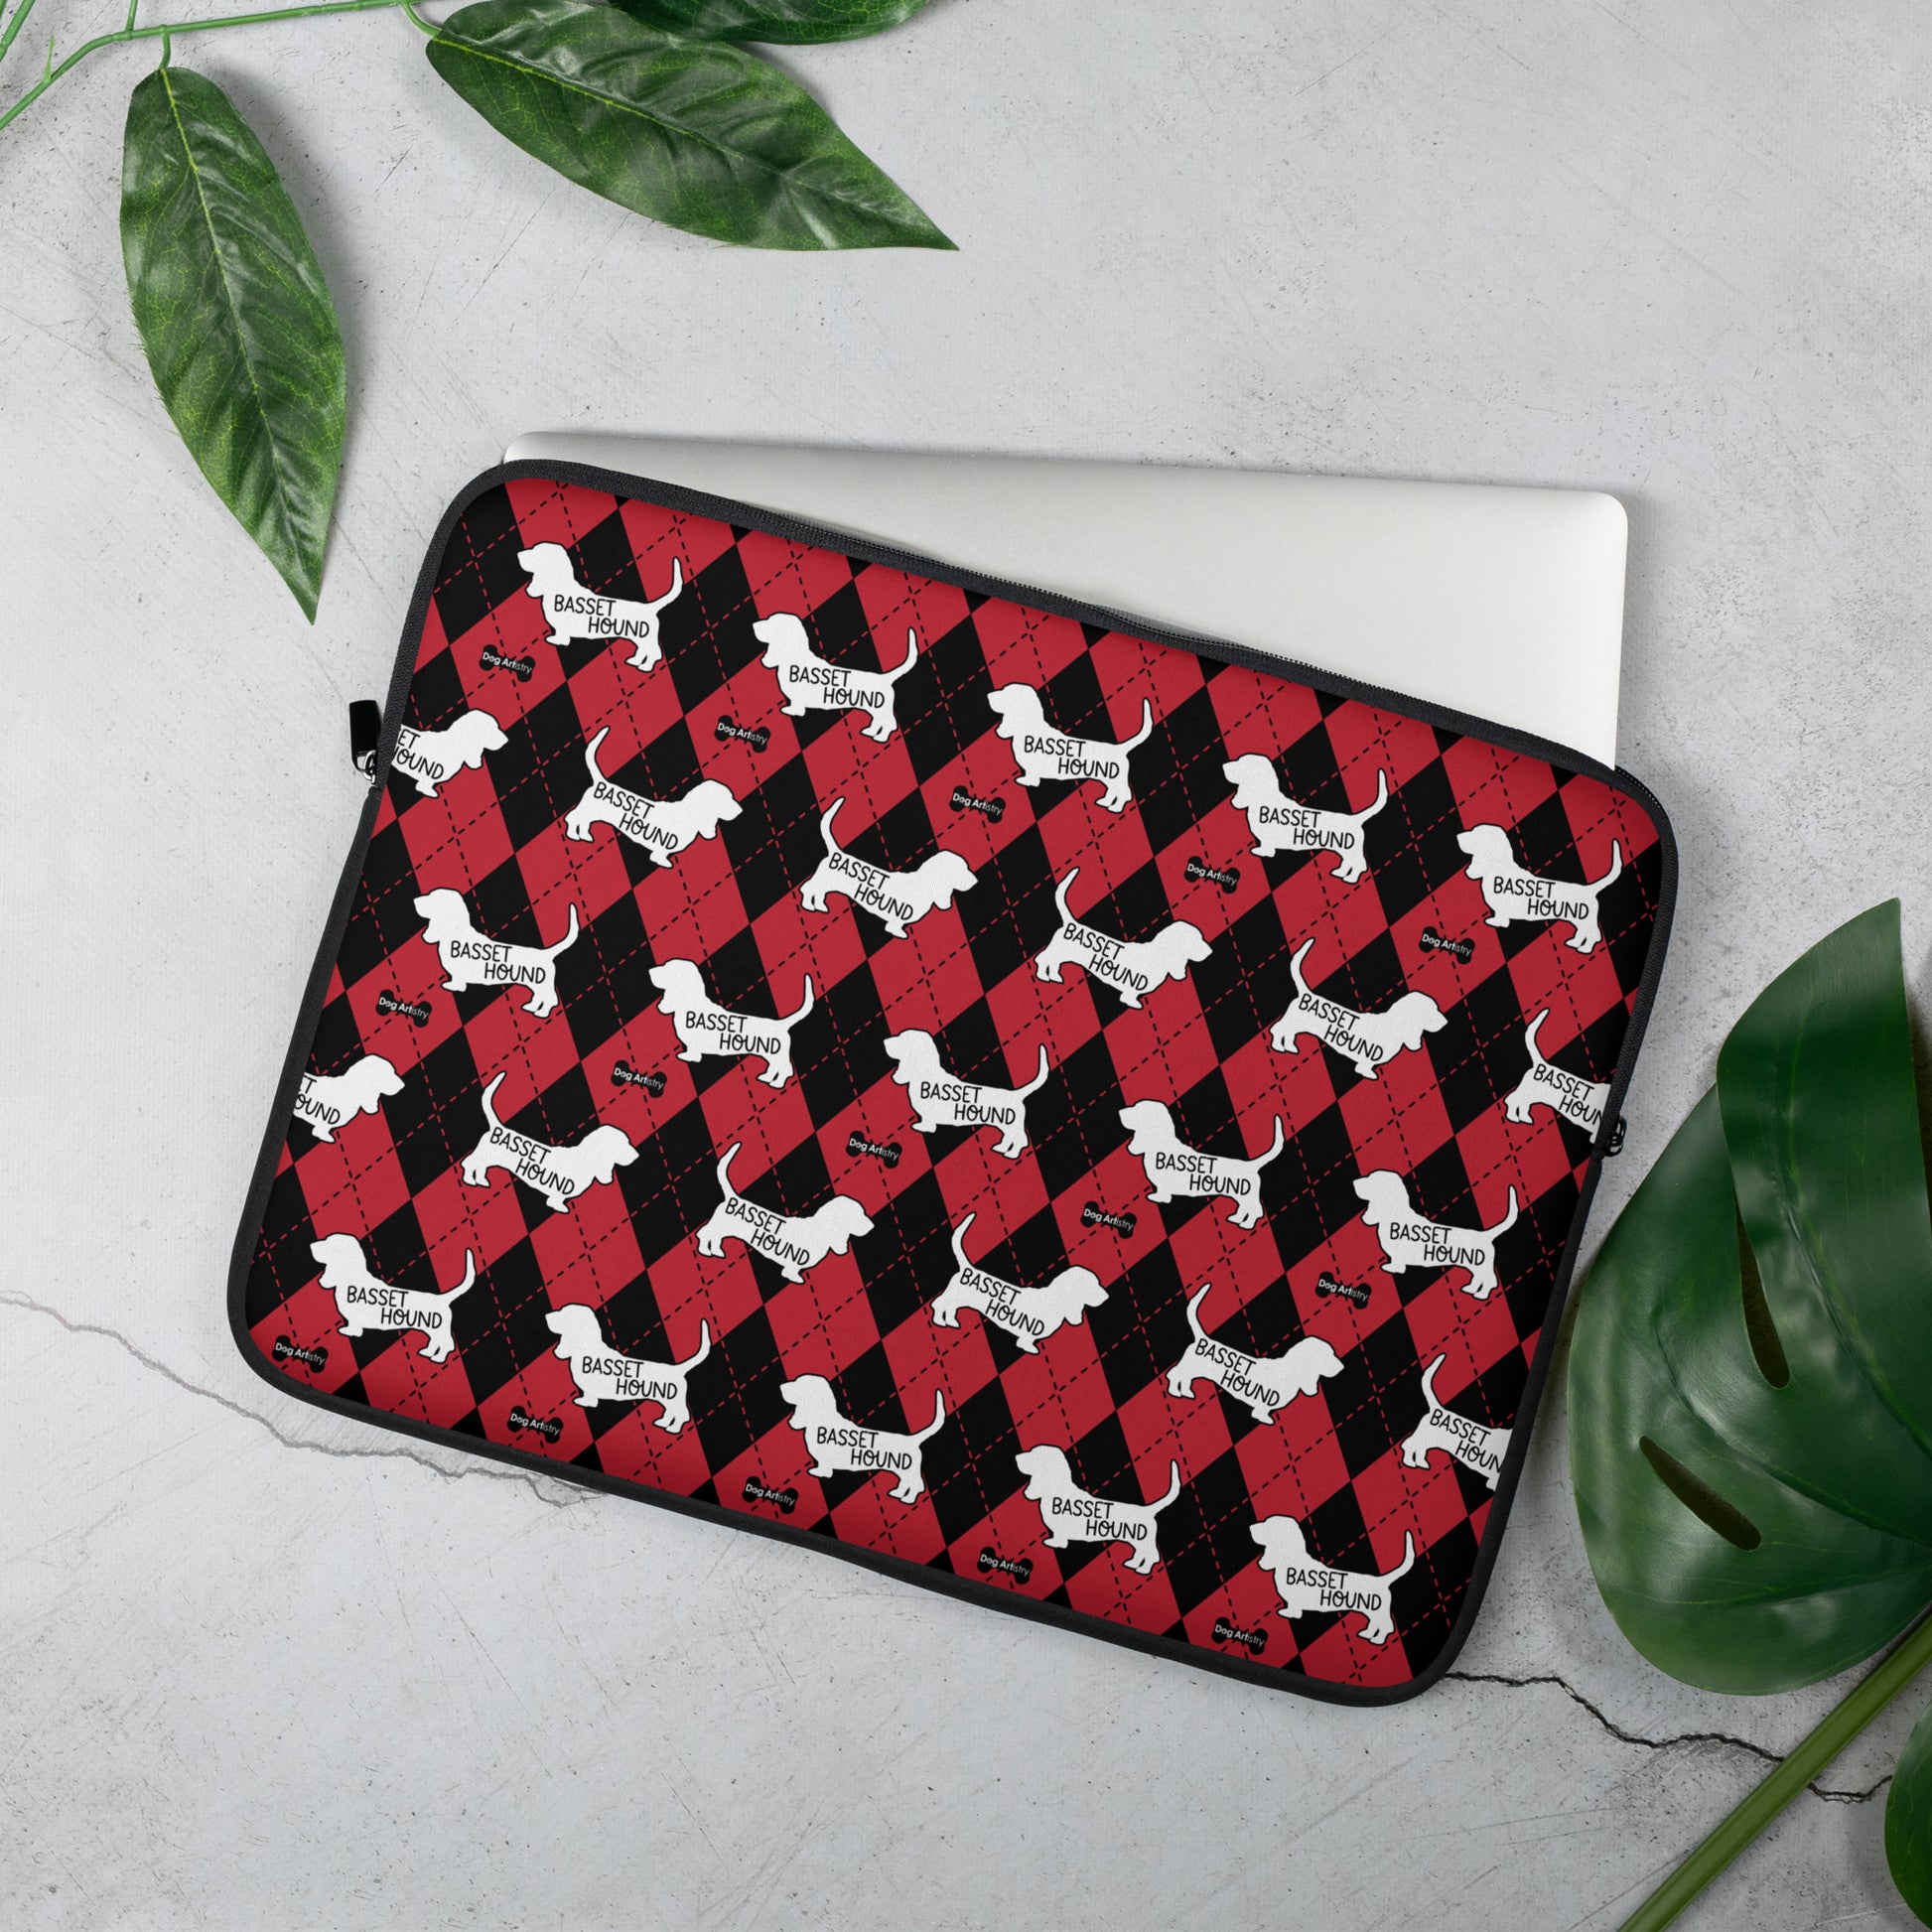 Basset Hound red and black argyle laptop sleeve by Dog Artistry